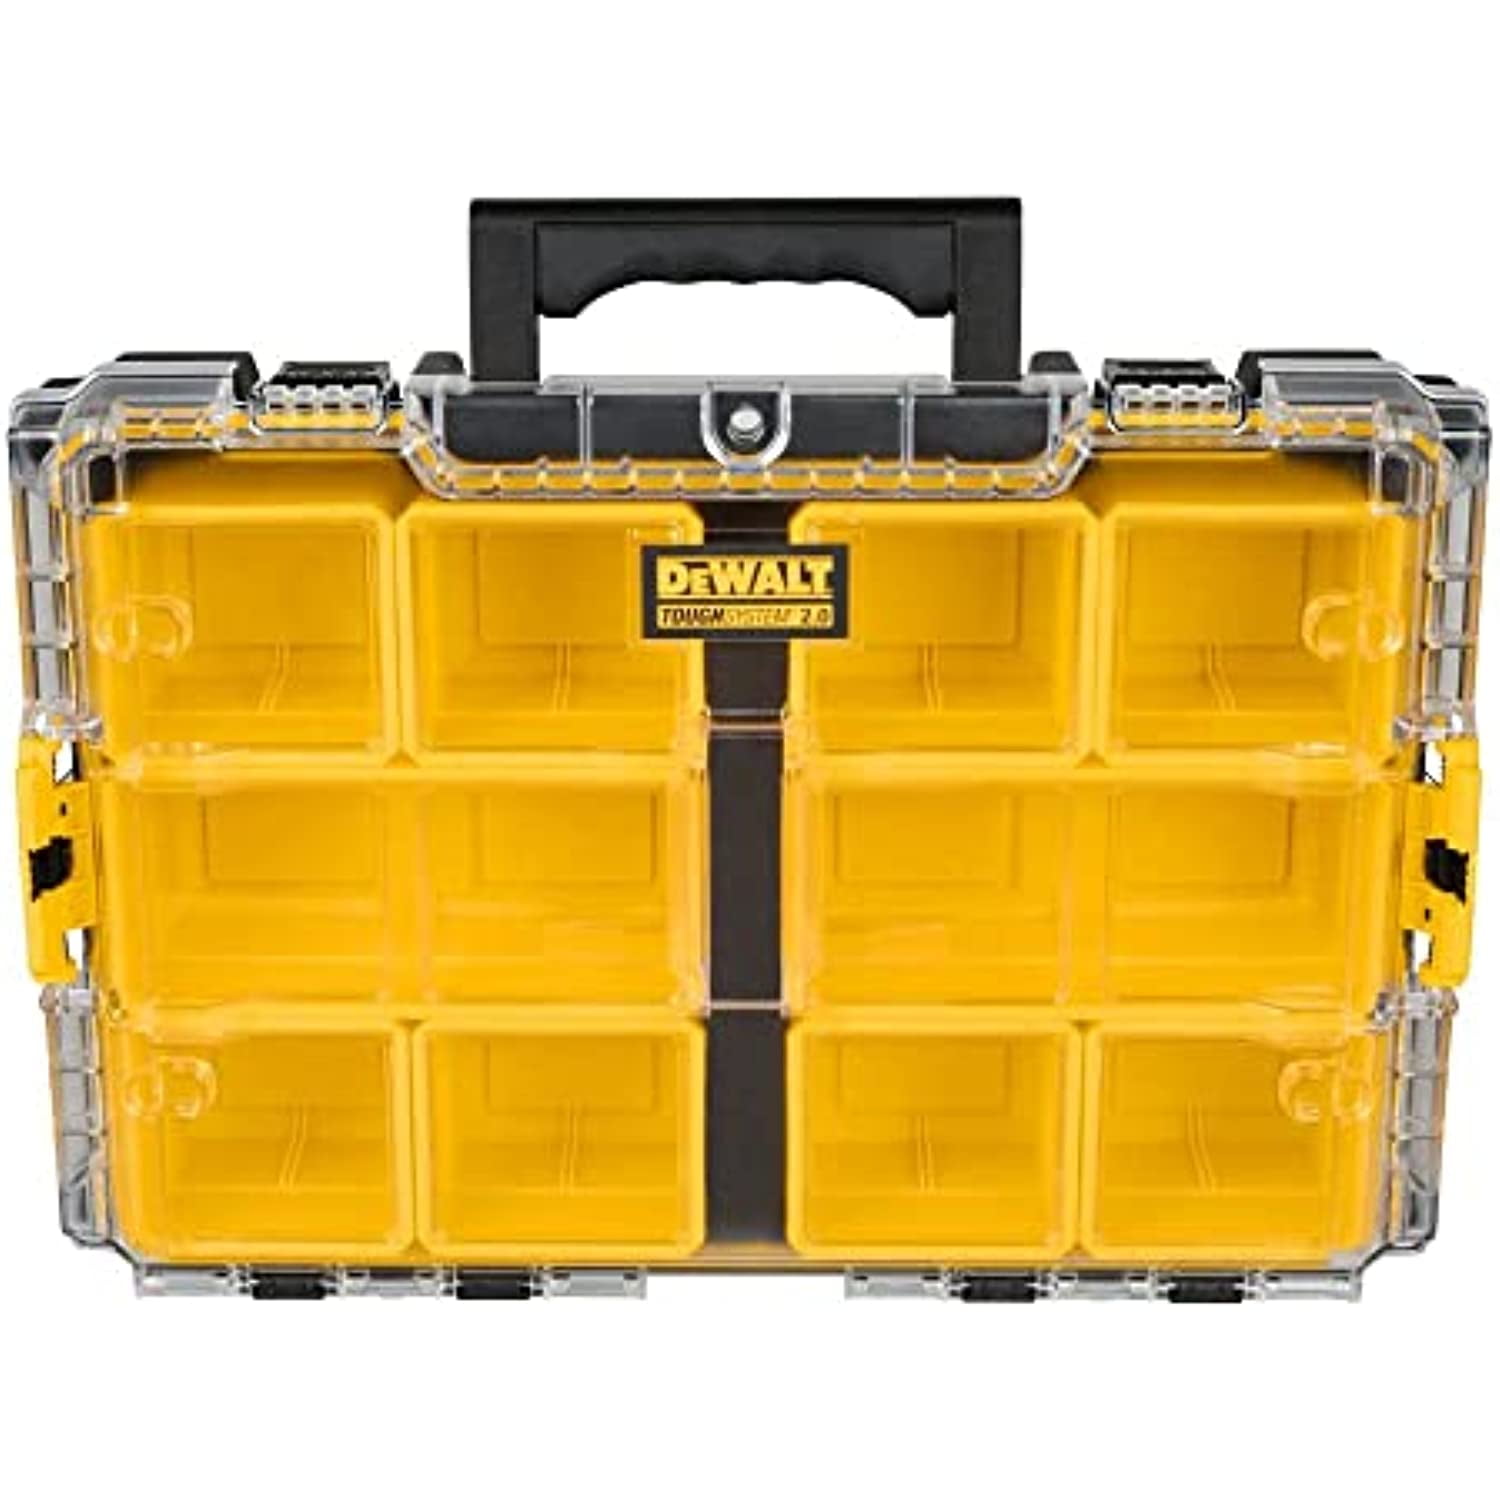 STANLEY® LARGE DOUBLE-SIDED TOOL ORGANIZER - JIMKA Tools